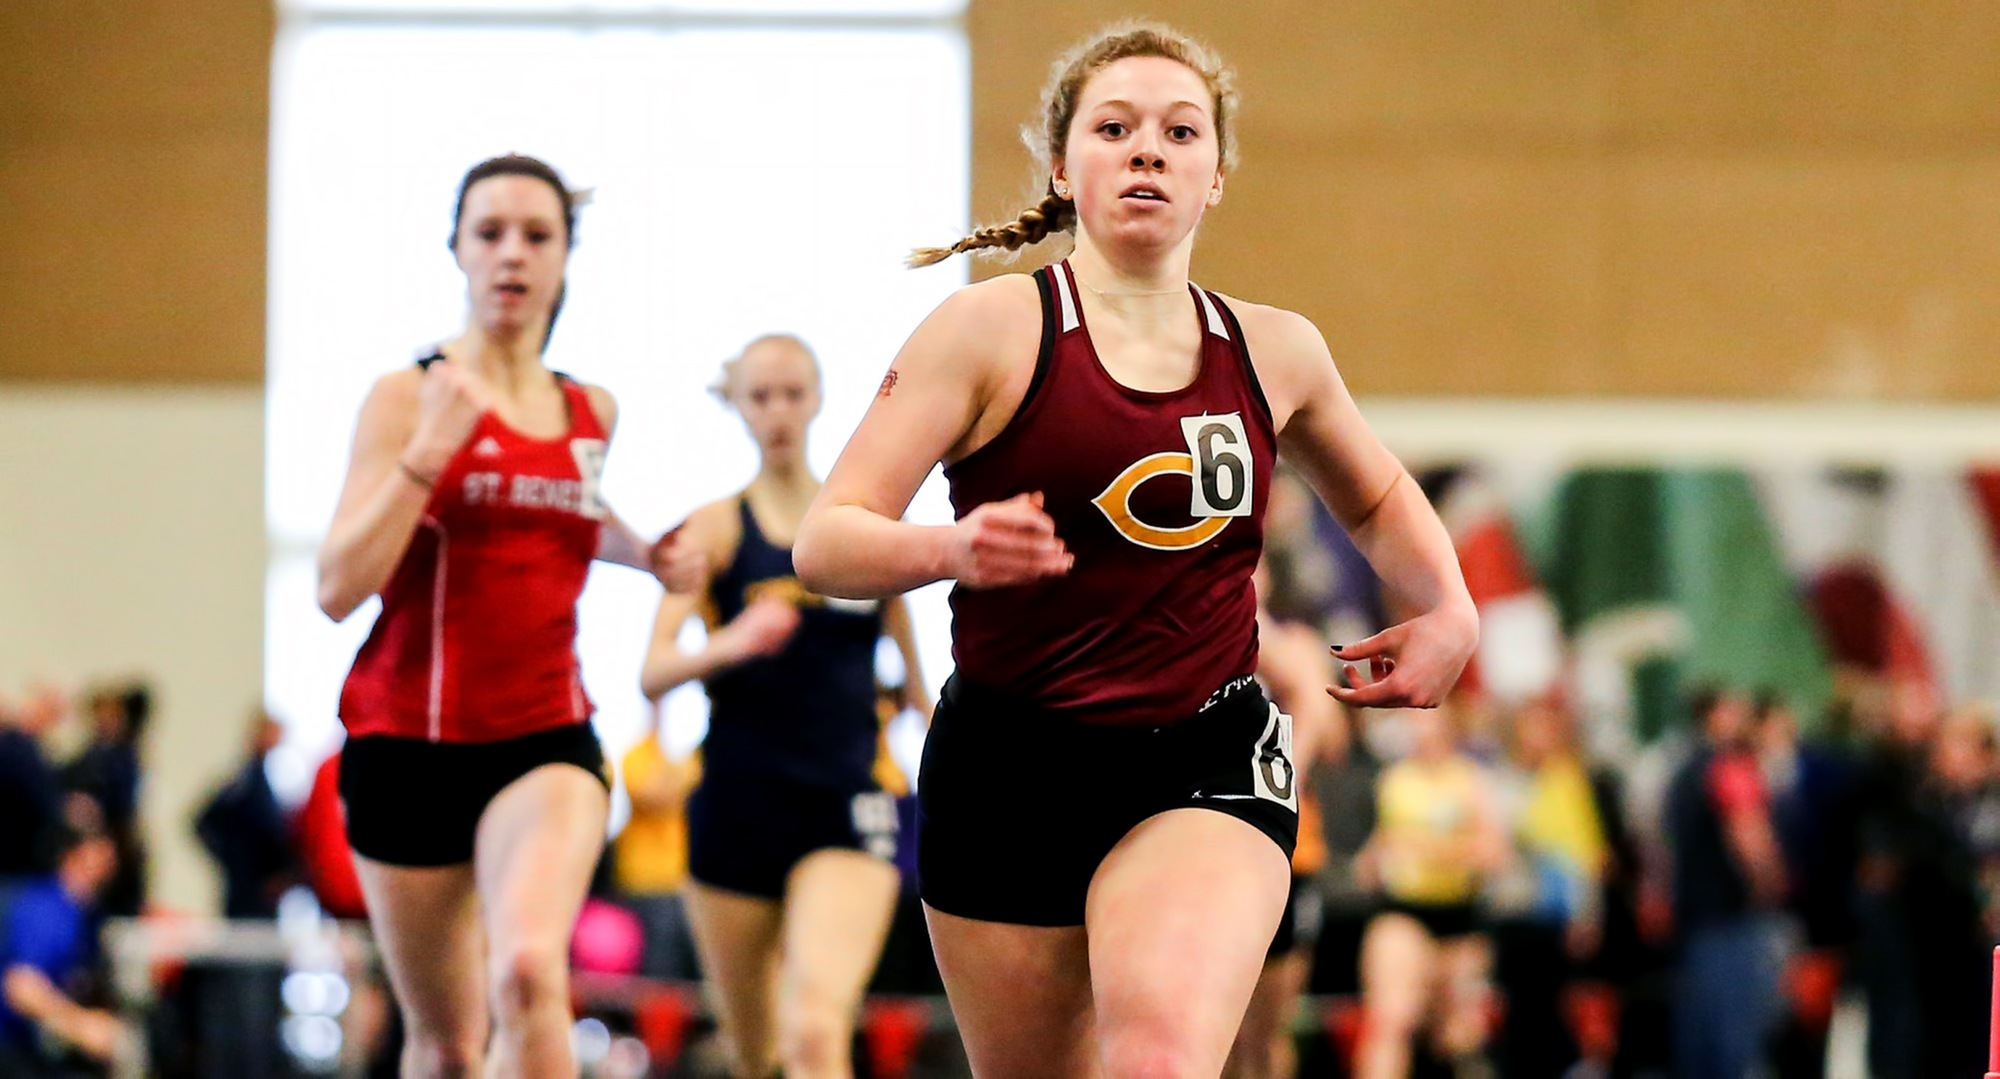 Freshman Josie Herrmann ran a career-best time of 1:40.14 in the 600 meters and placed seventh. She was one of eight Cobber athletes to post a Top 10 finish. (Photo courtesy of Nathan Lodermeier)